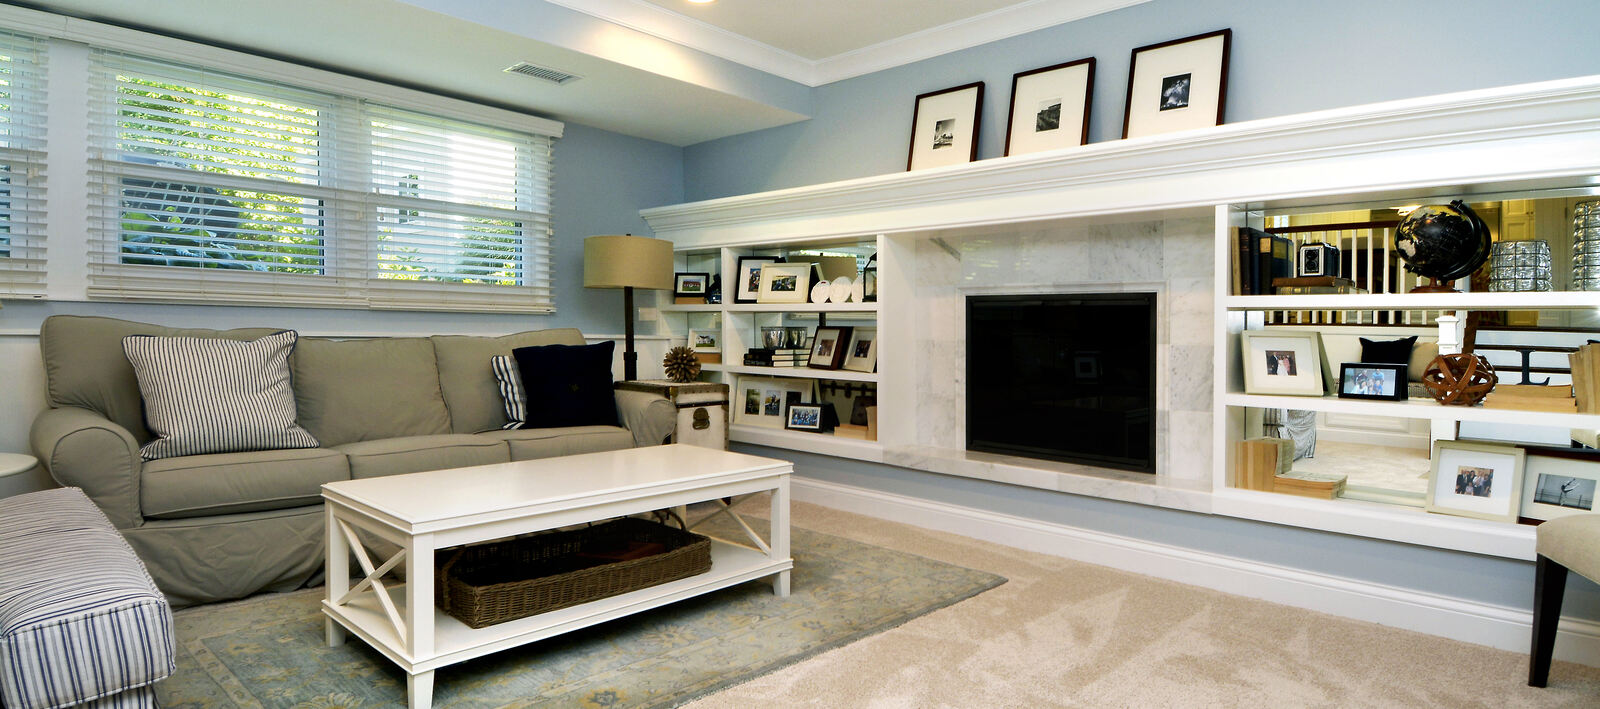 custom built in shelves with fireplace in middle in living room remodel in chicago.JPG